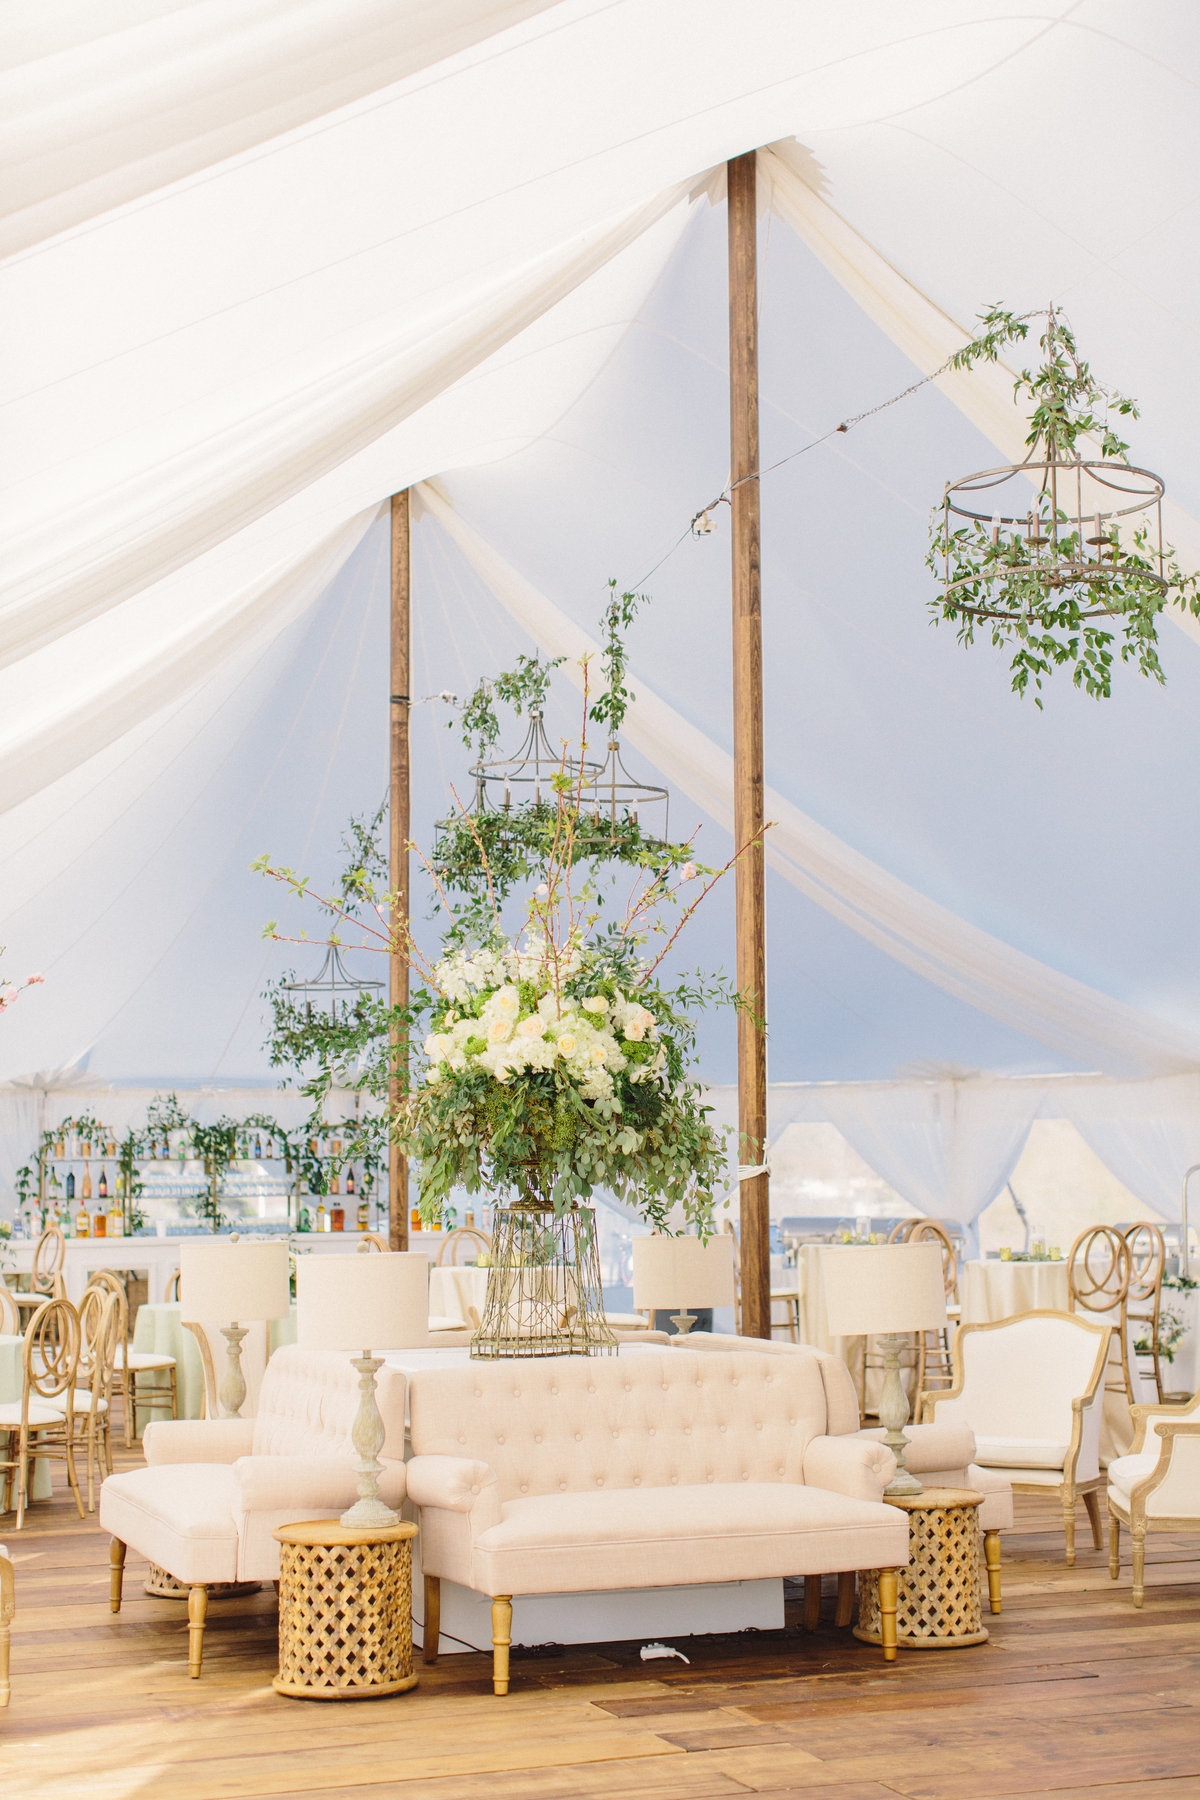 clink-events-greenville-wedding-planner-outdoor-tent-reception-7